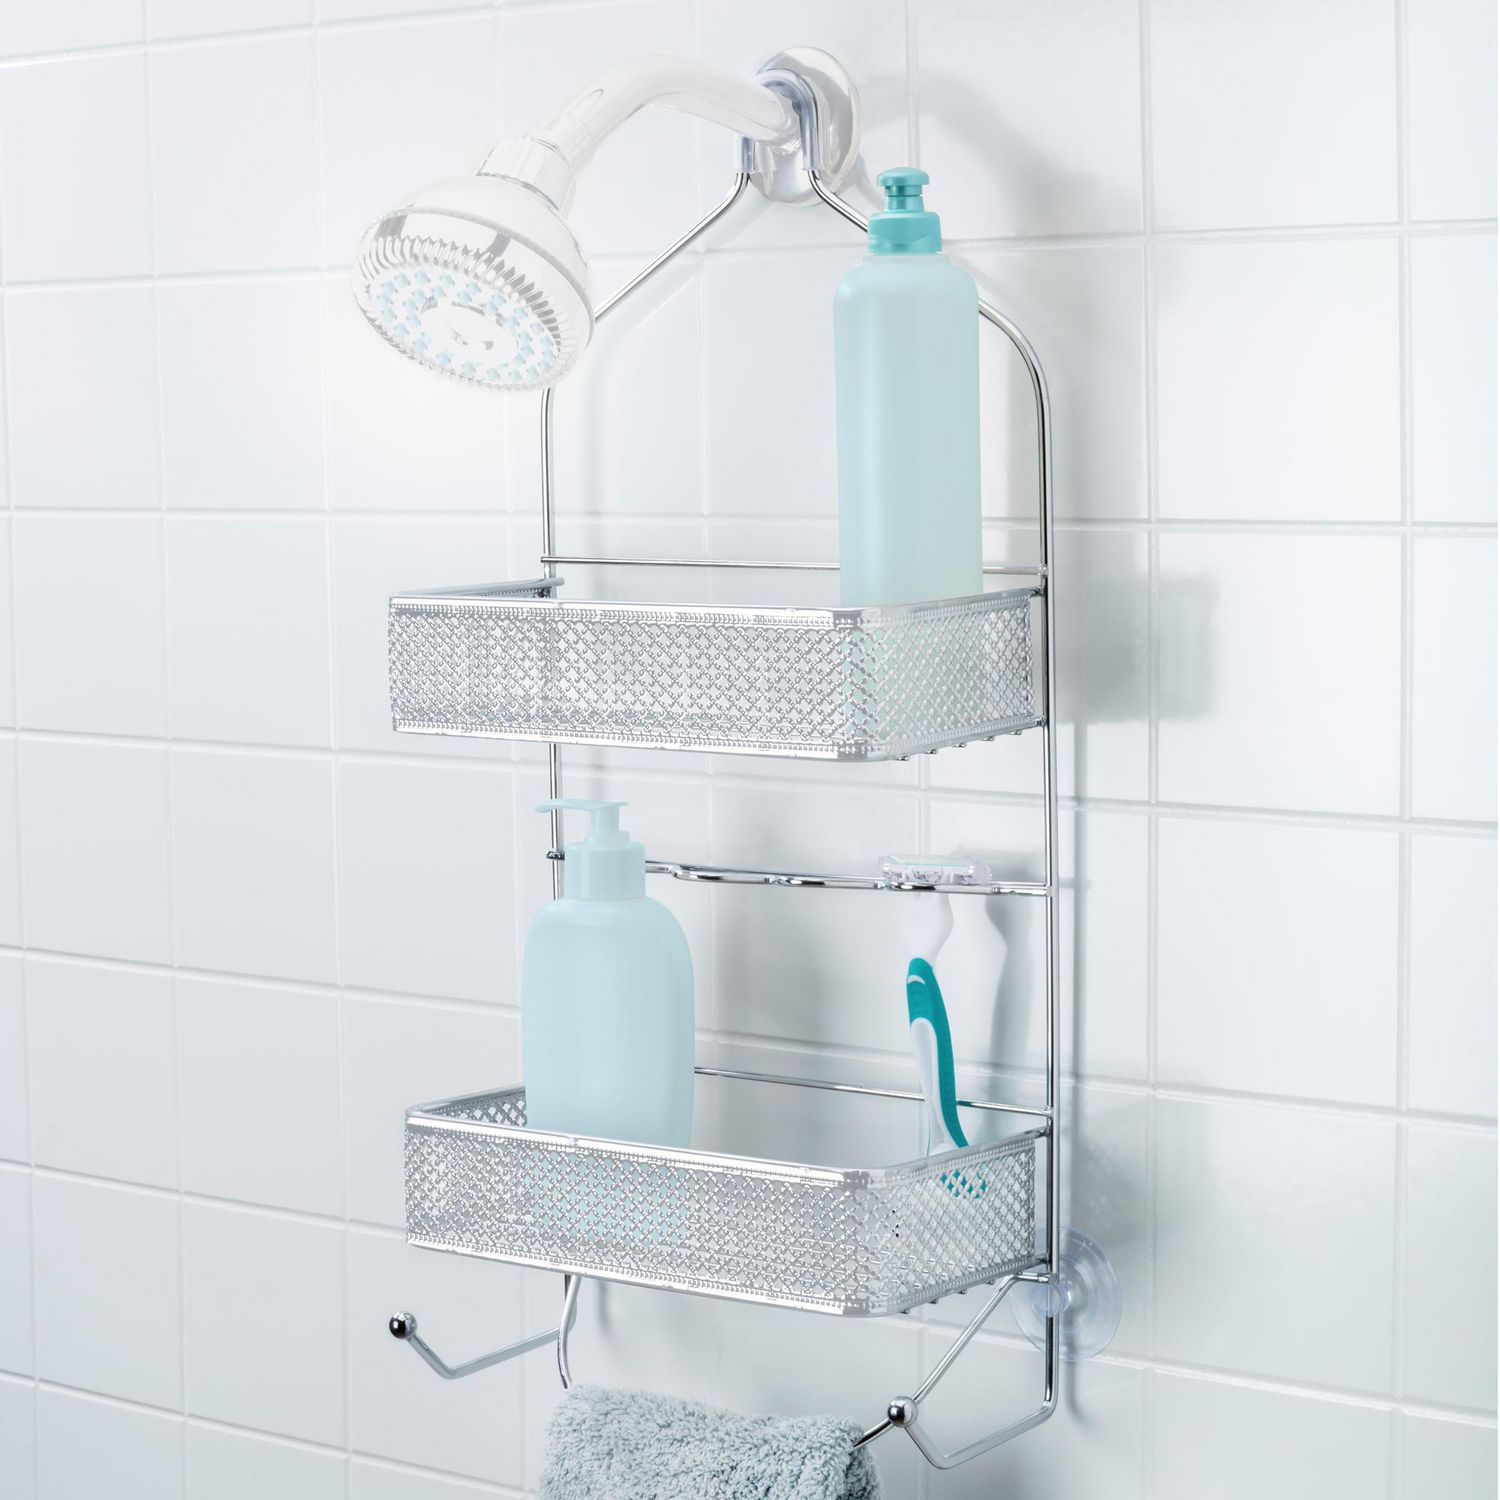 Shower caddy, Ideal to organize toiletries